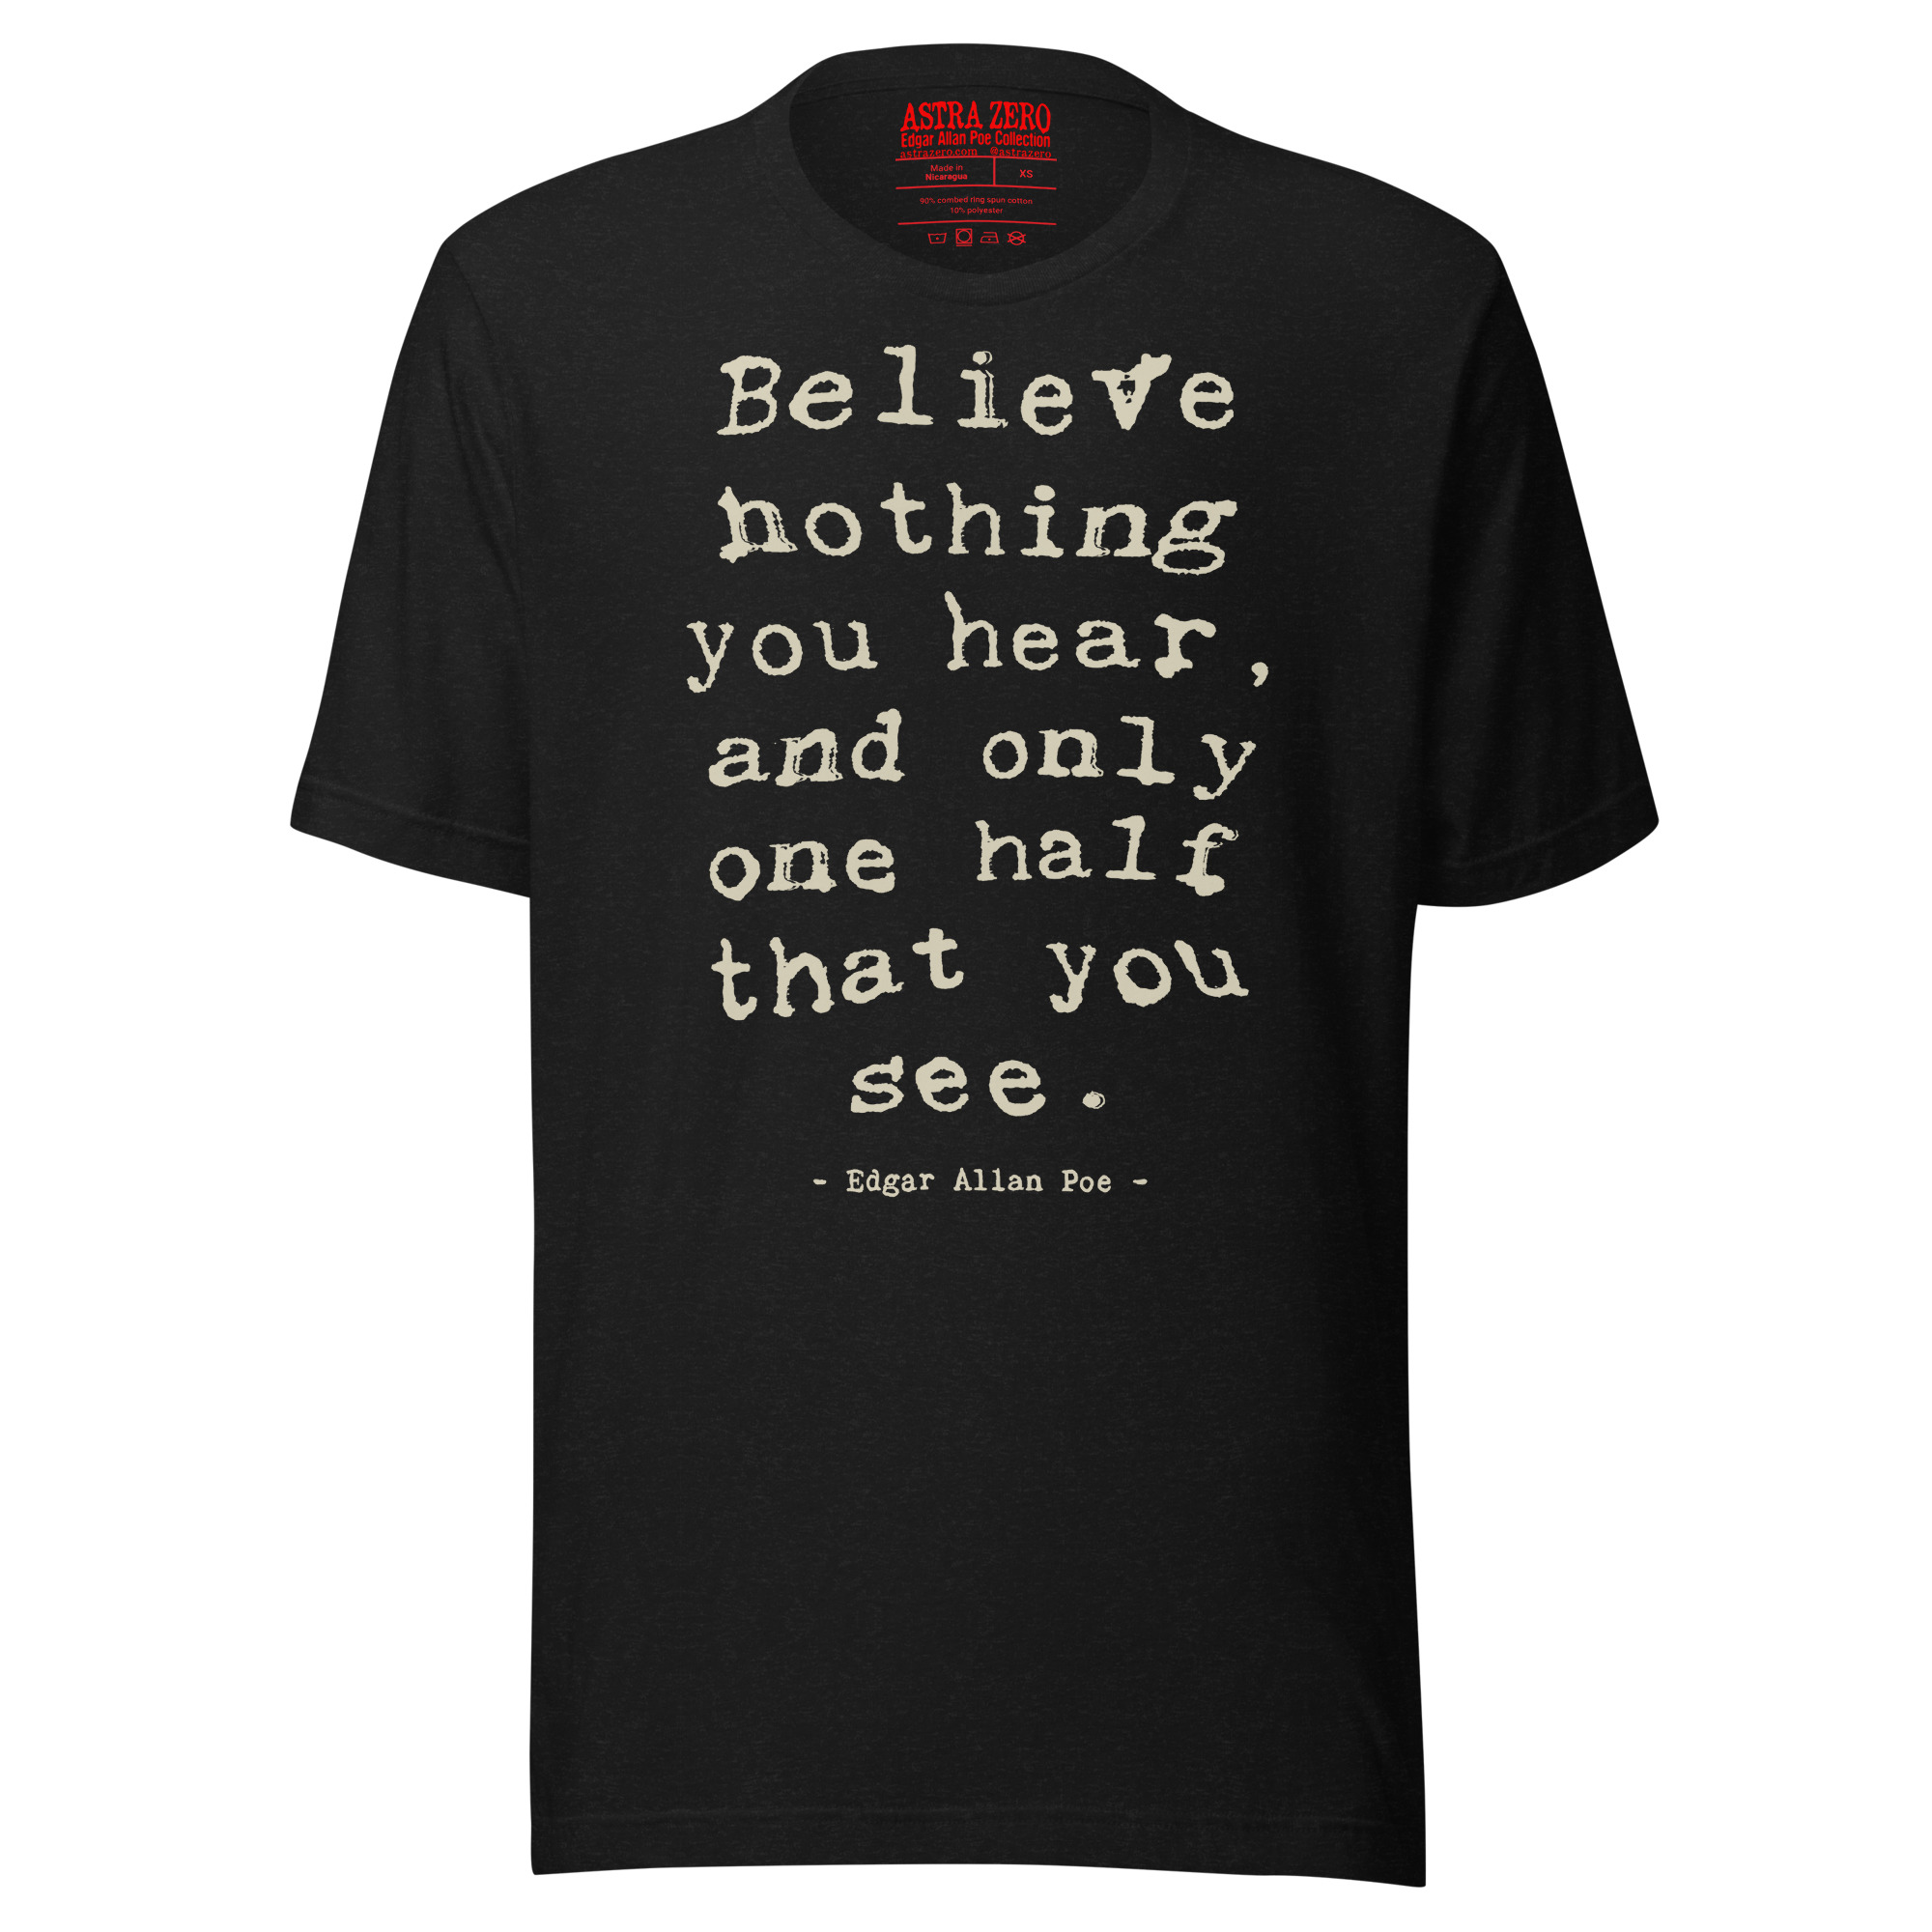 Featured image for “Believe Nothing You Hear - Unisex t-shirt”